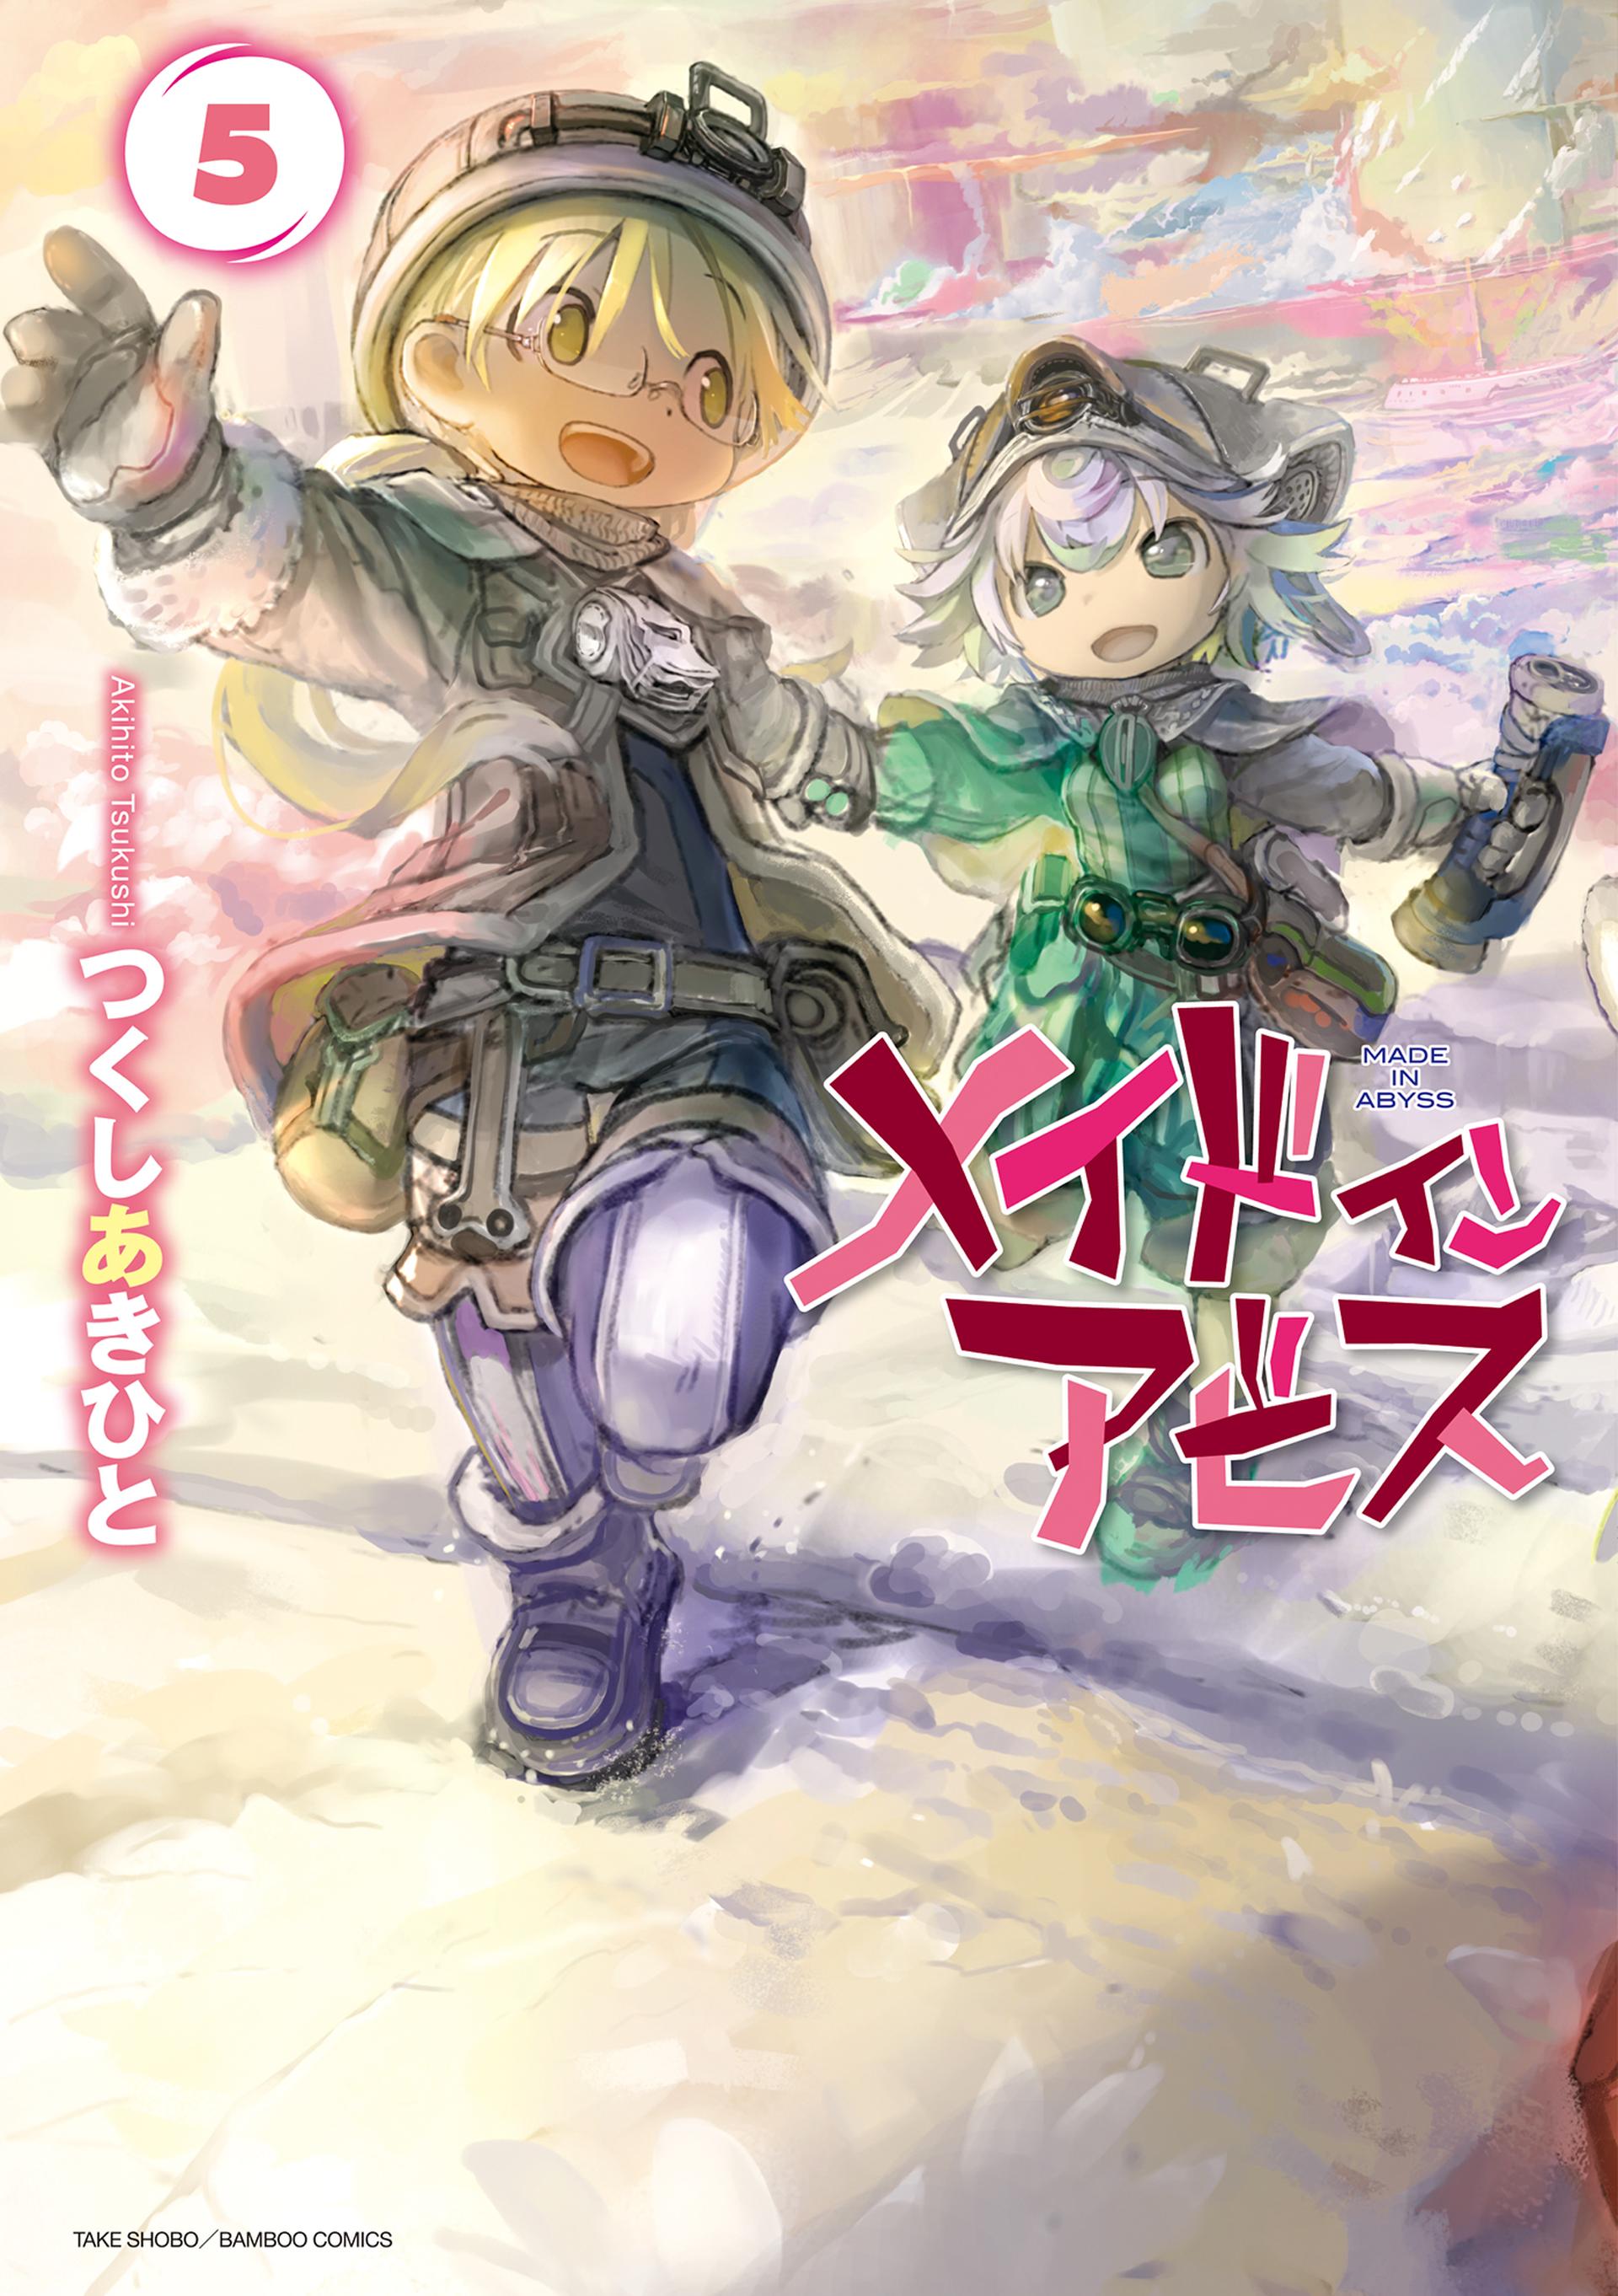 Made in Abyss cover 23